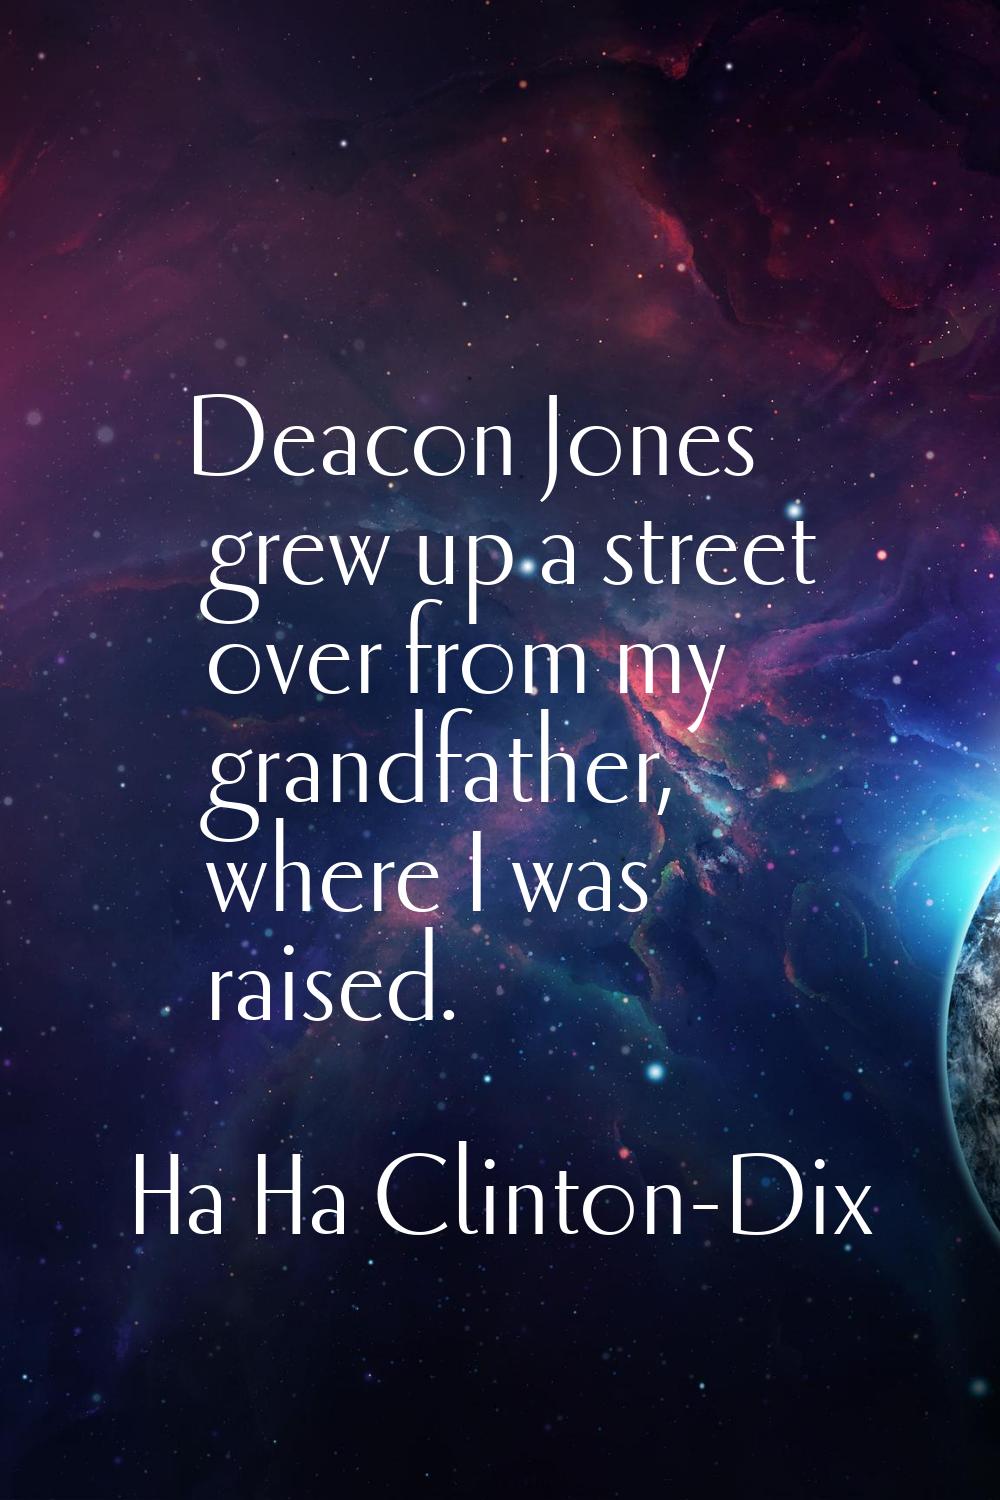 Deacon Jones grew up a street over from my grandfather, where I was raised.